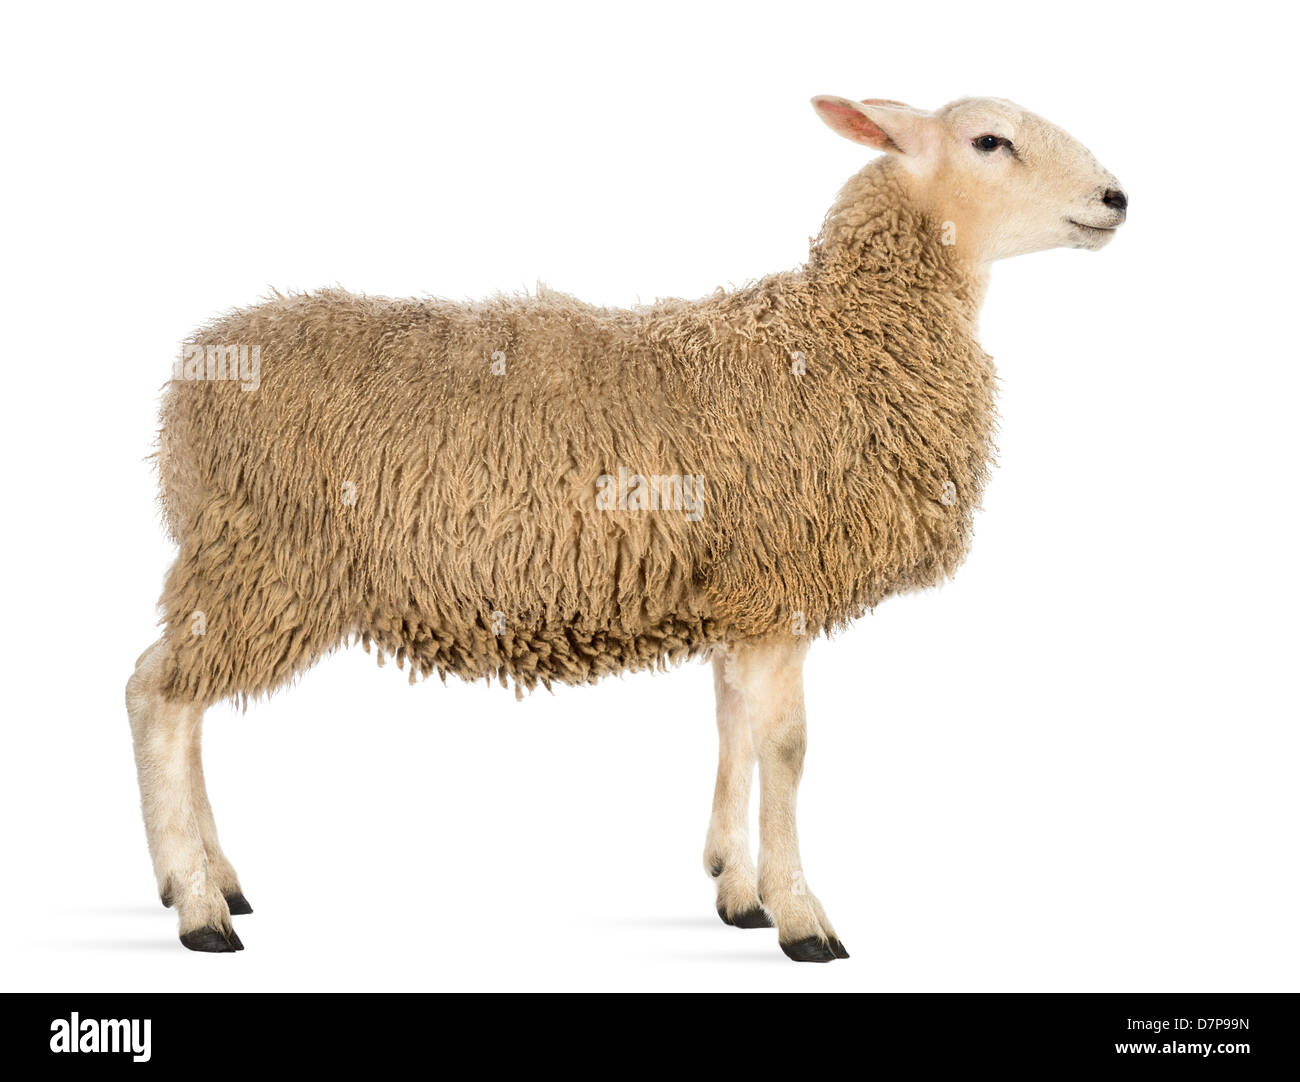 Side view of Sheep standing in front of white background Stock Photo